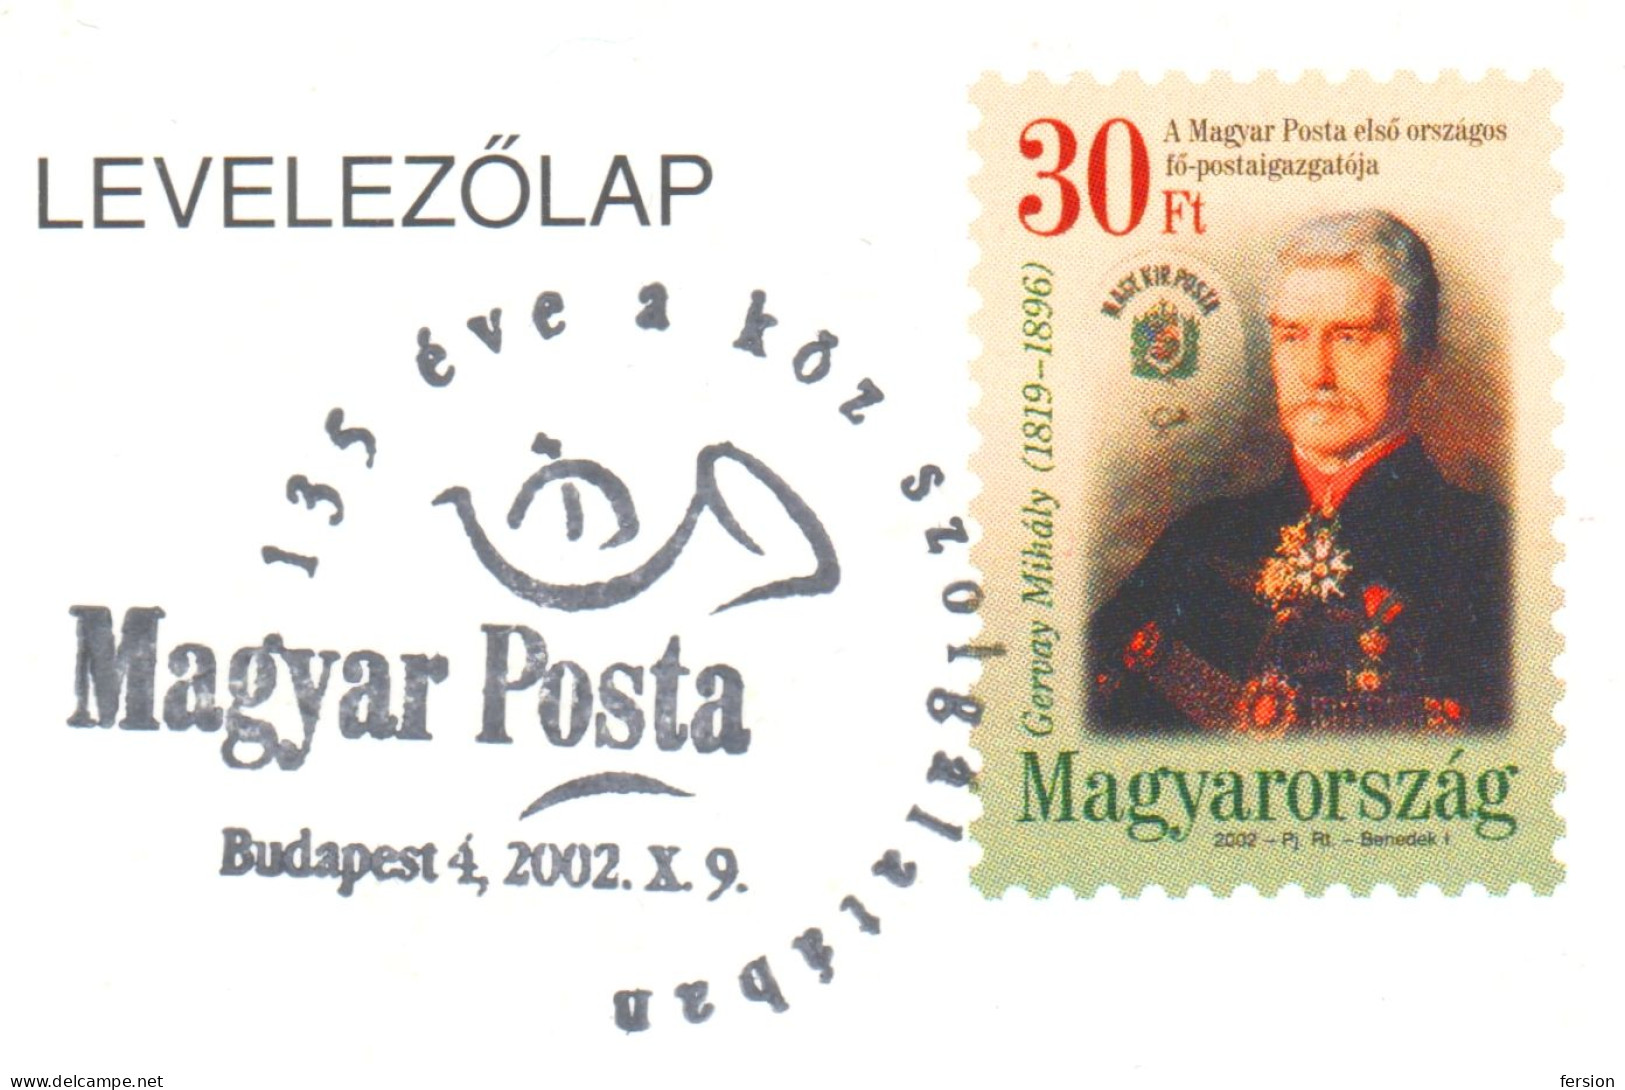 COMPUTER Telegraph MAILBOX Stamp On Stamp CD POSTCARD 1997 UPU Gervay Mihály POST Director STATIONERY 2002 HUNGARY FDC - Post